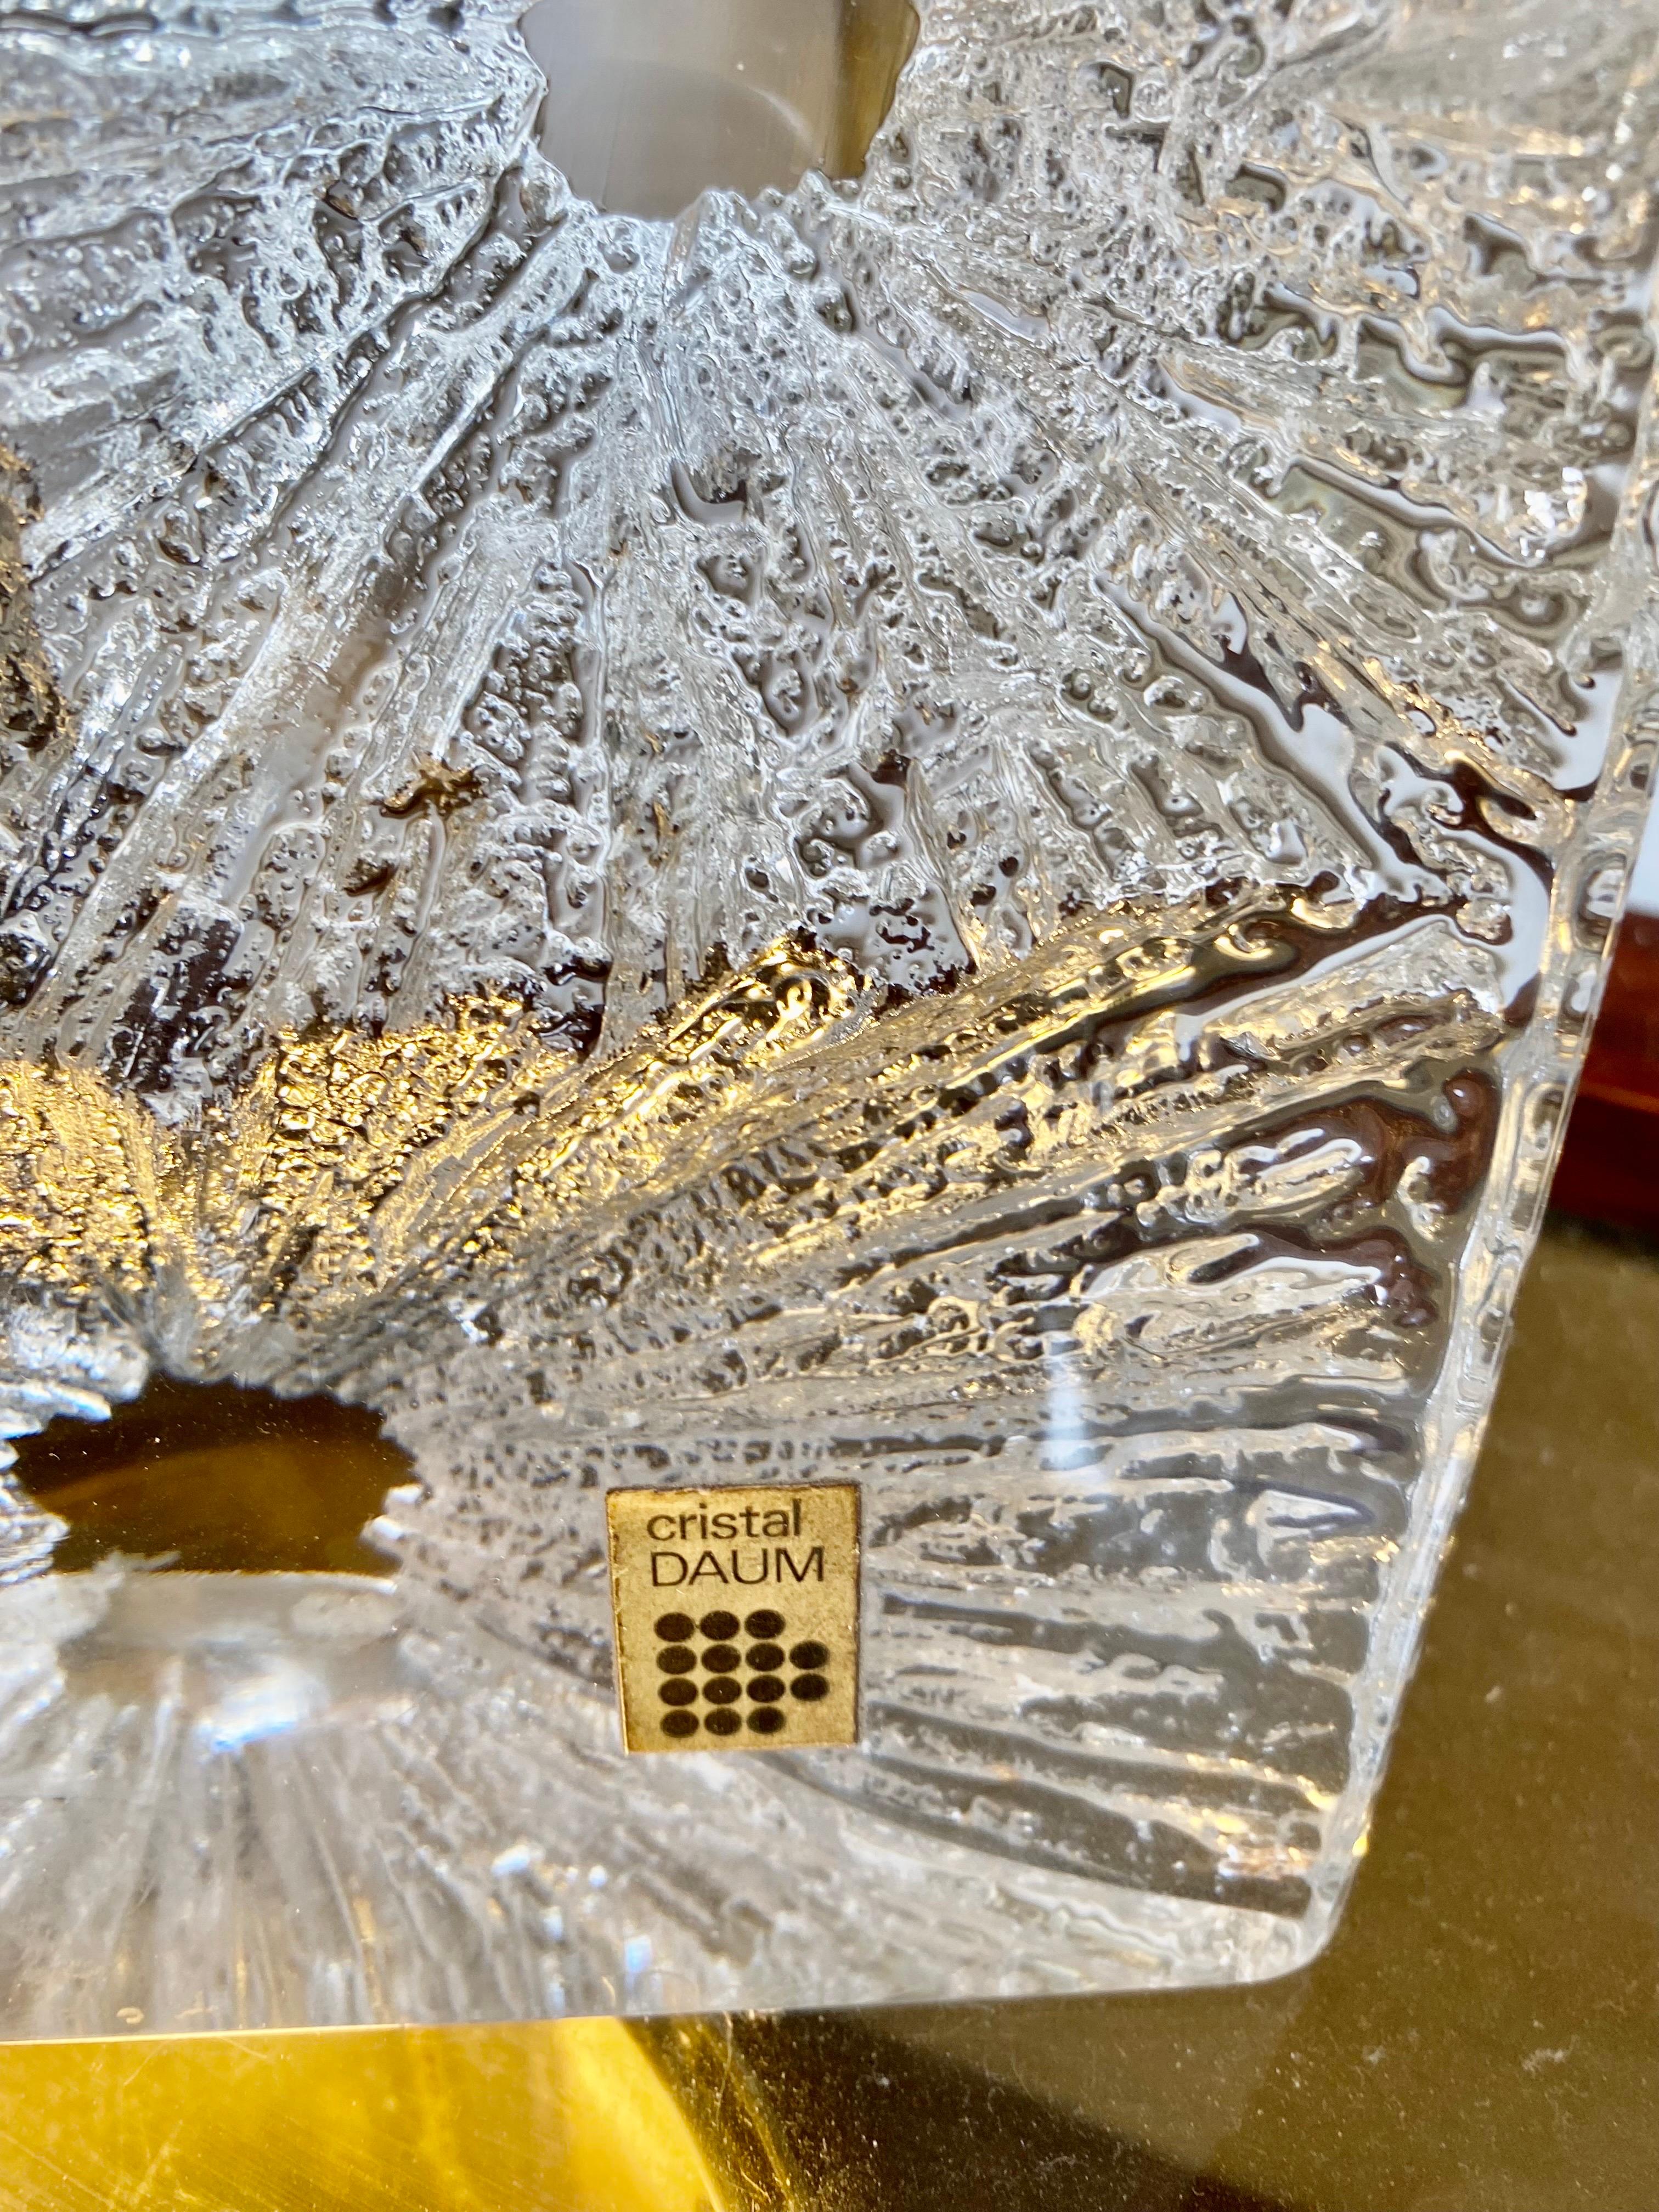 Mid-20th Century Daum Crystal Table Clock from the 1950s, France For Sale